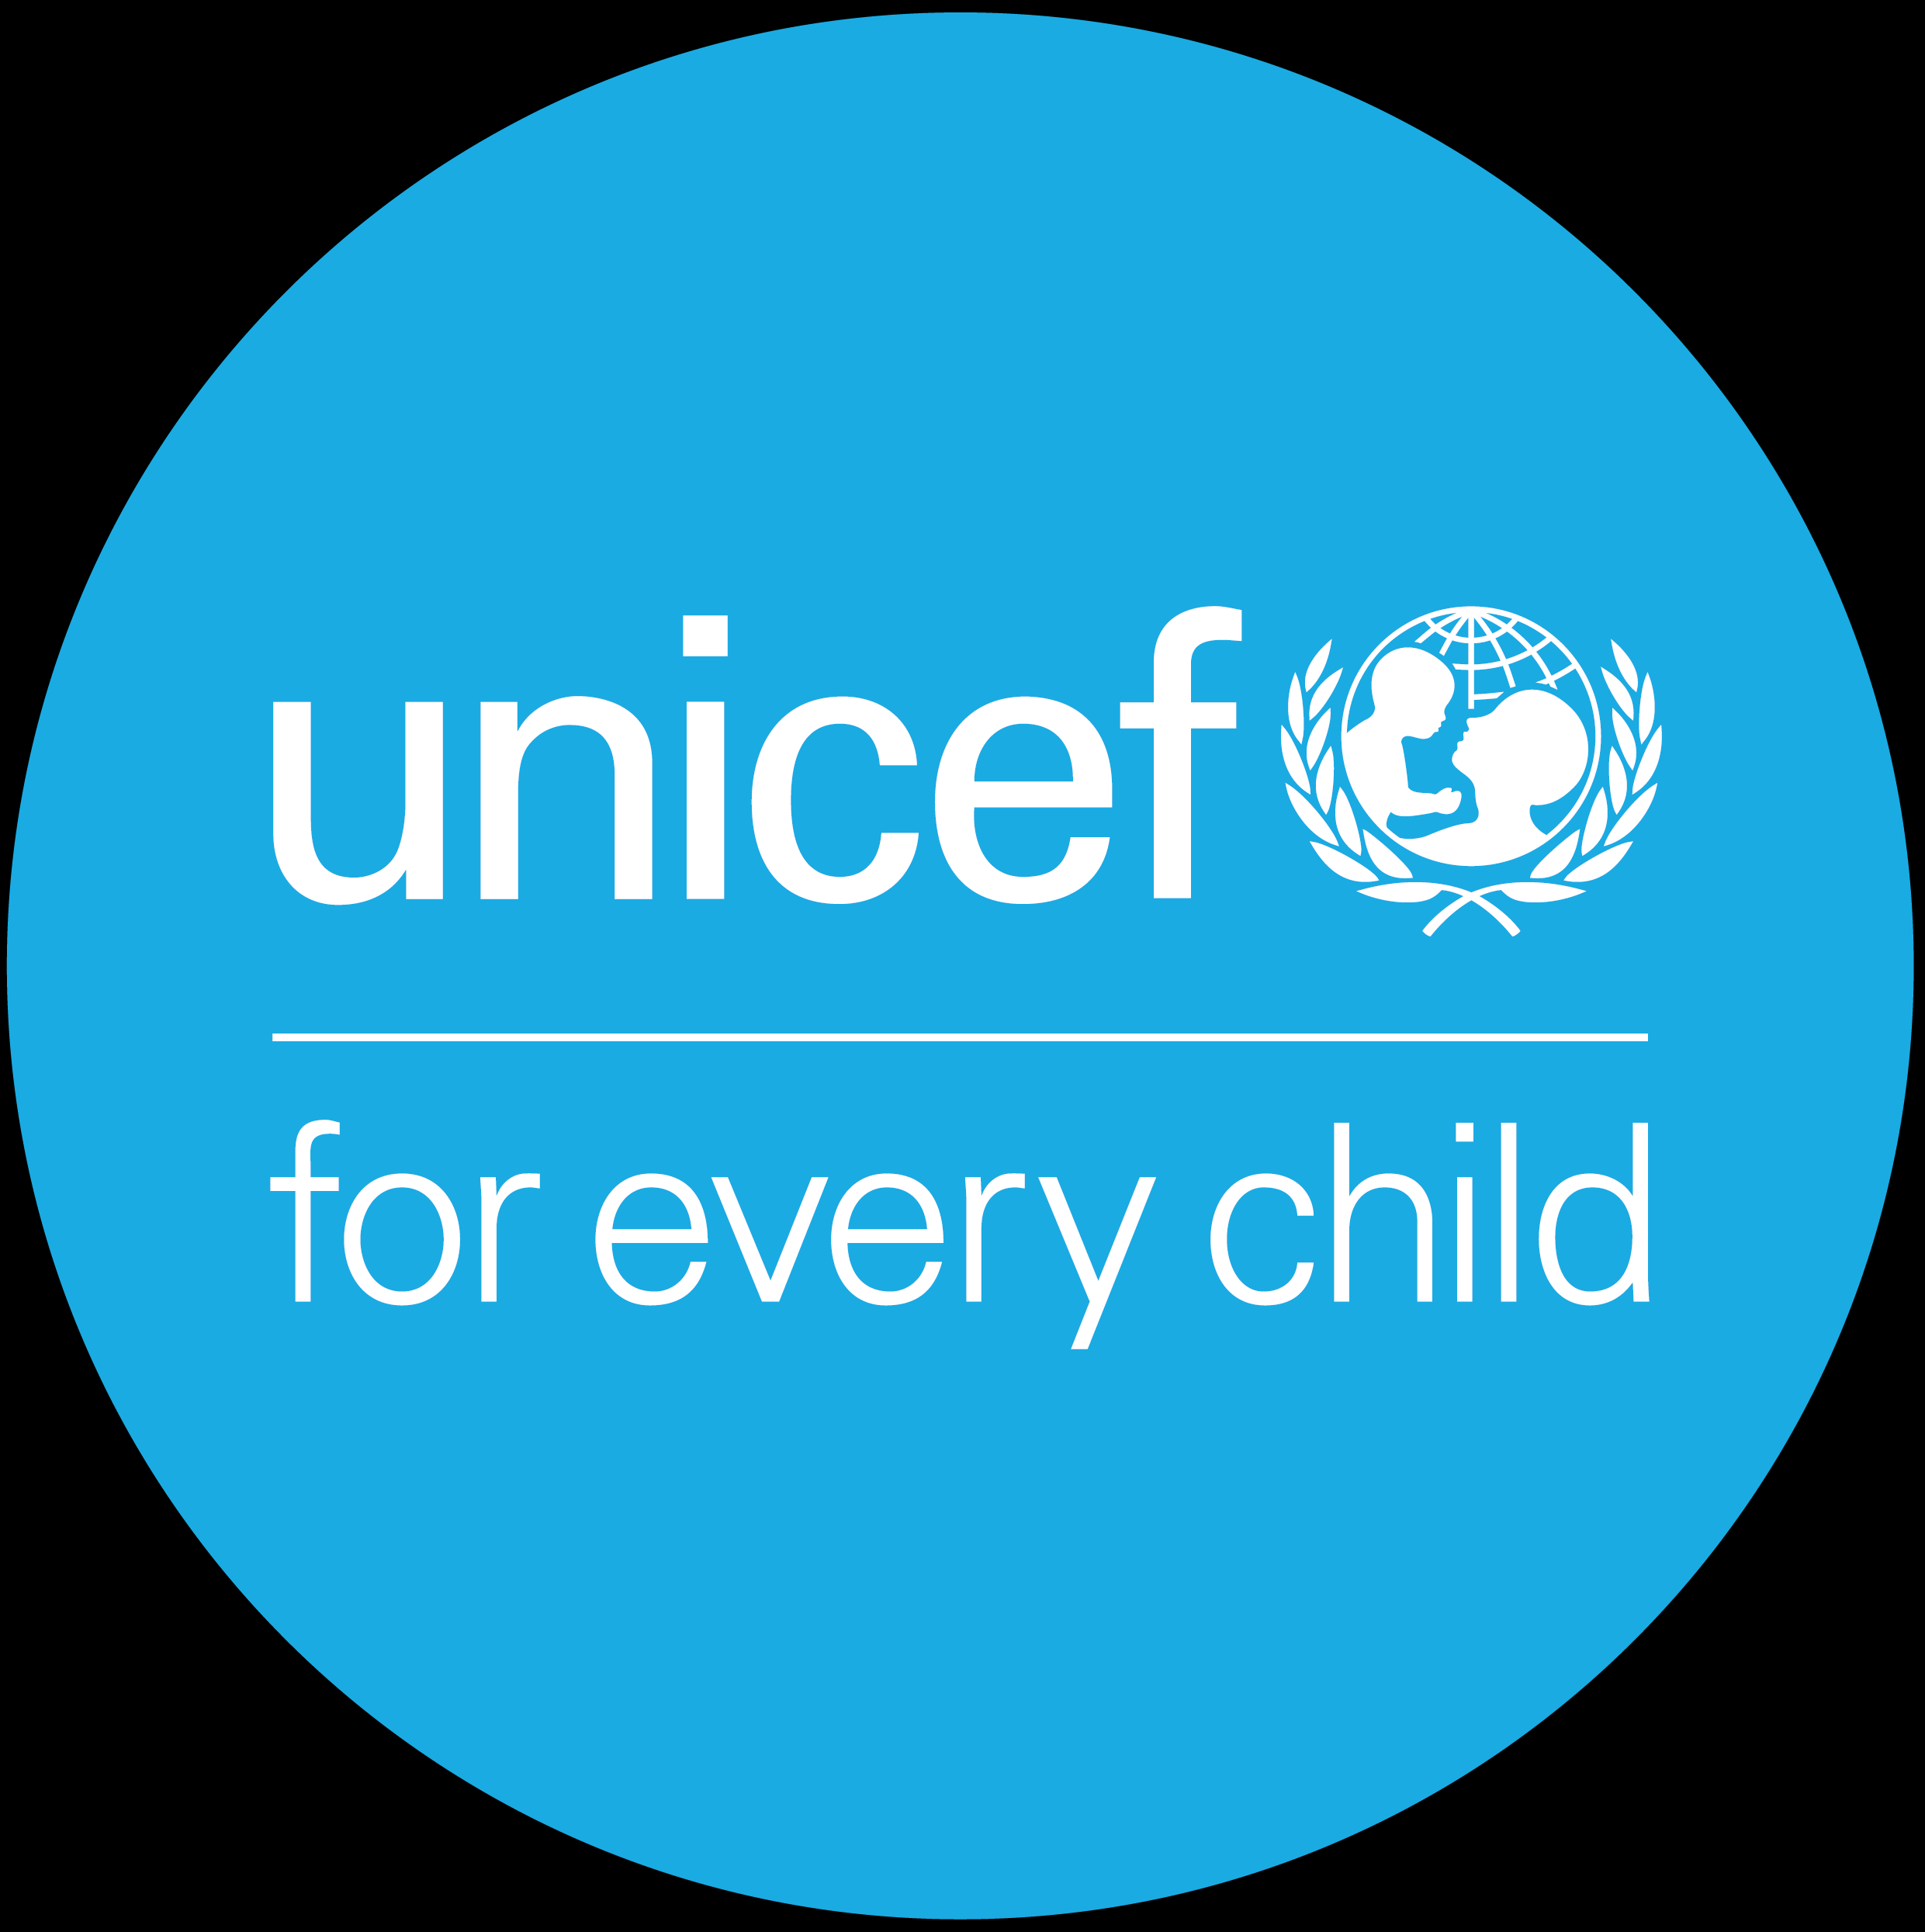 https://assets.roar.media/assets/nsuUoWkhUmR3Vy8C_Unicef.png